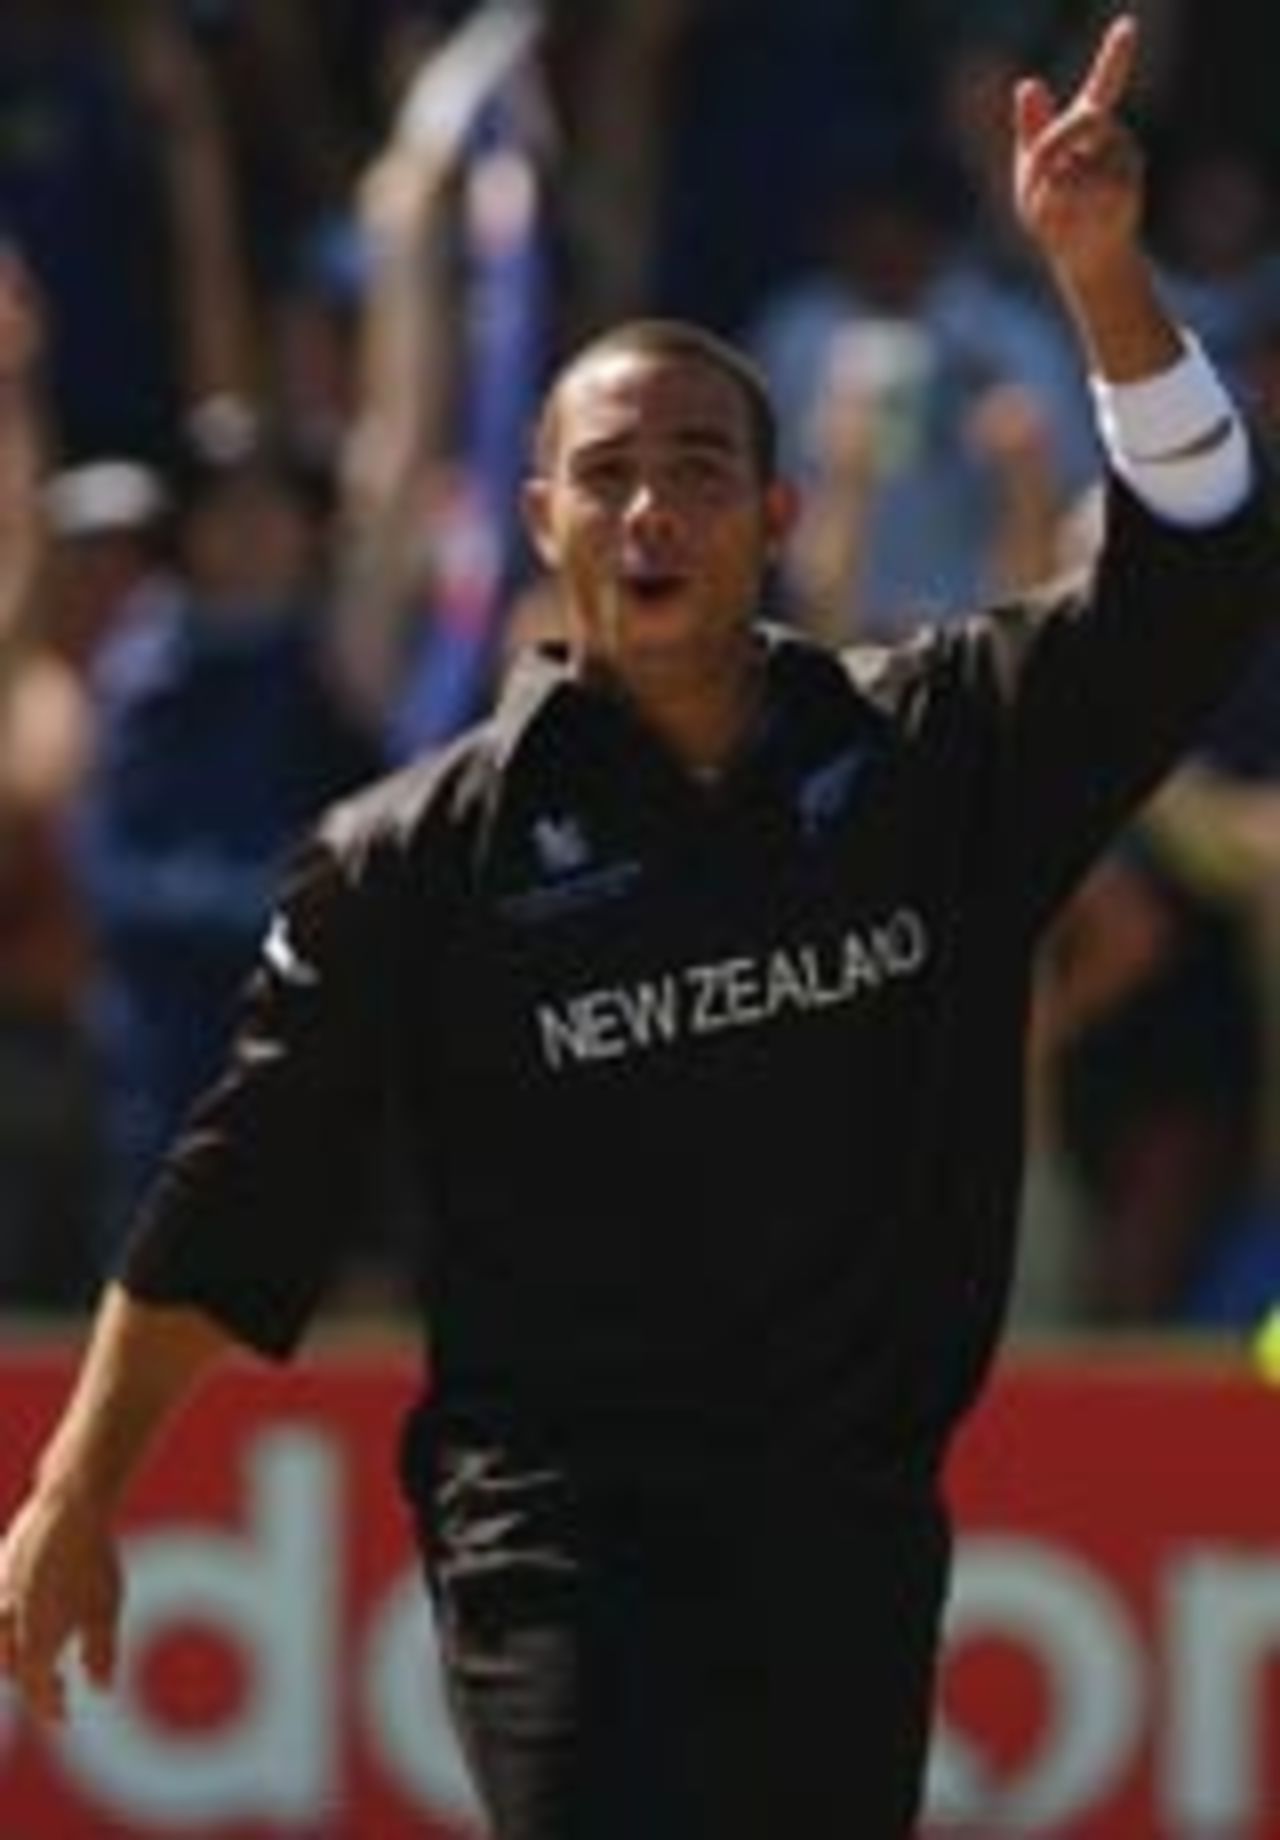 Andre Adams celebrates a wicket in New Zealand's World Cup match against West Indies, New Zealand v West Indies, February 13, 2003